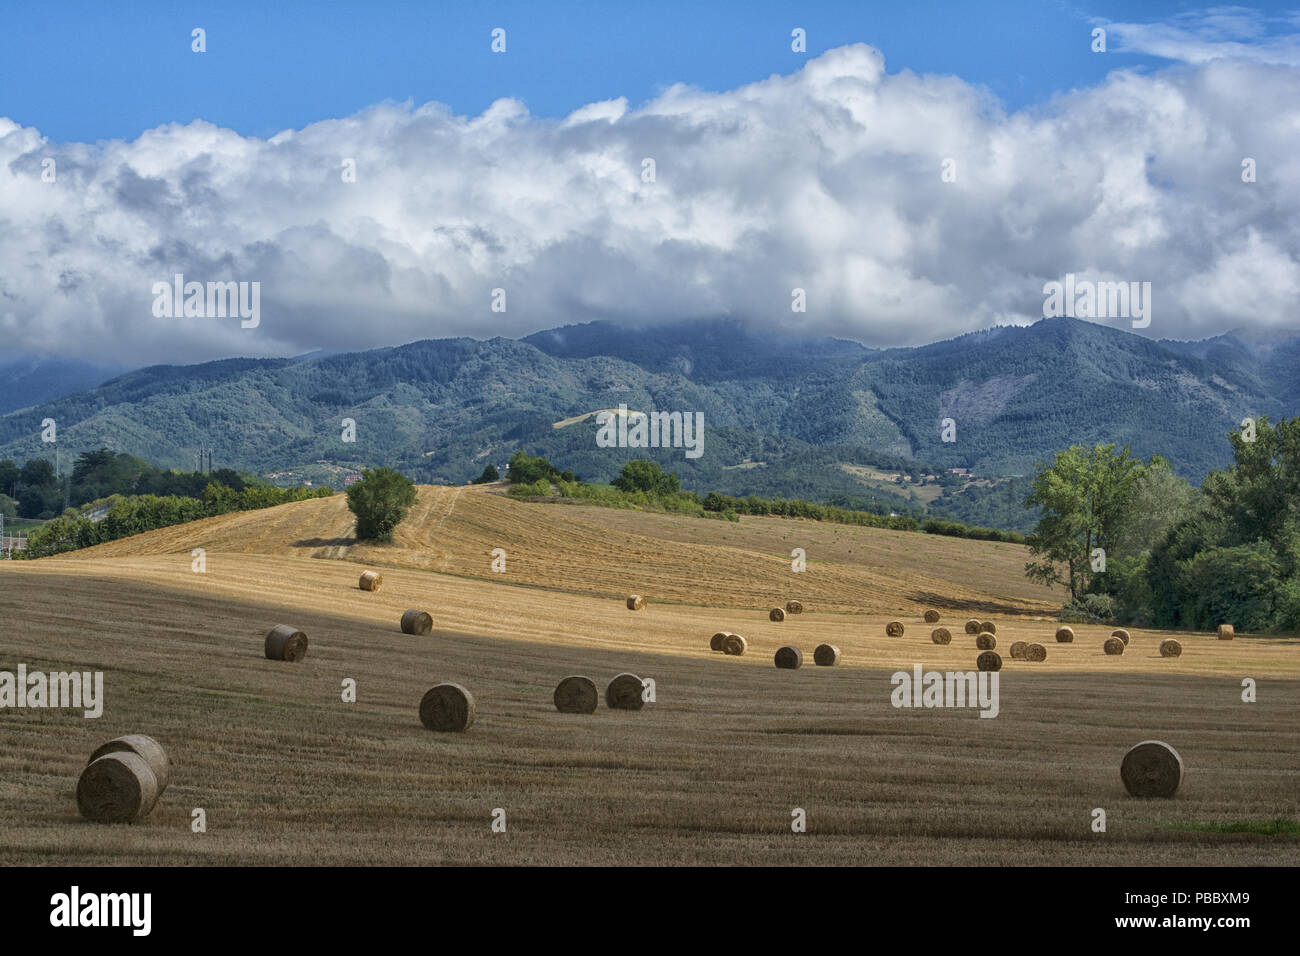 A TYPICAL TUSCAN LANDSCAPE Stock Photo